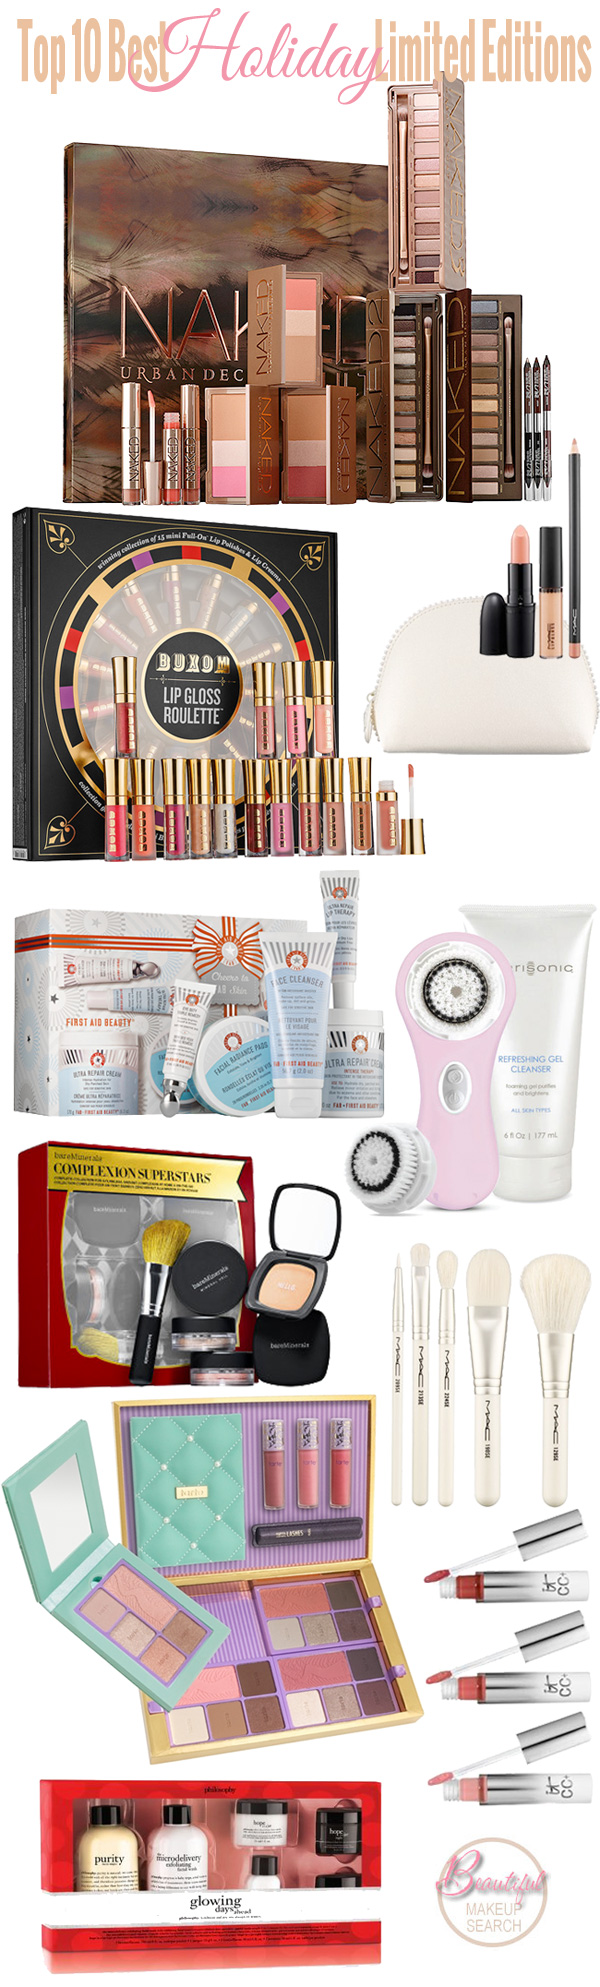 Top 10 Best Holiday Limited Edition Beauty Products